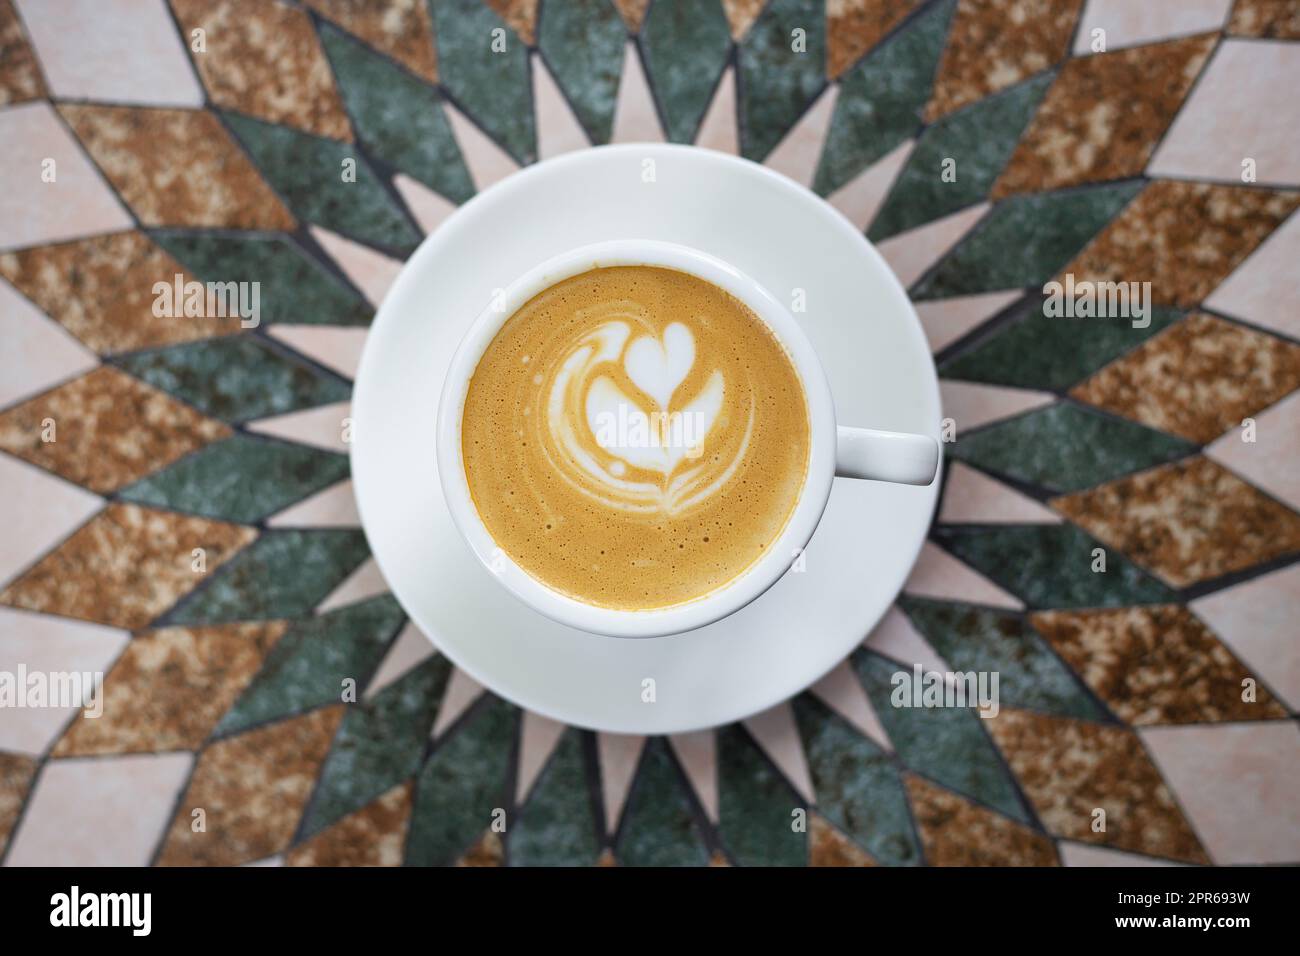 White cup of cappuccino coffee with heart-shaped foam on a beautiful table. View from above. Stock Photo